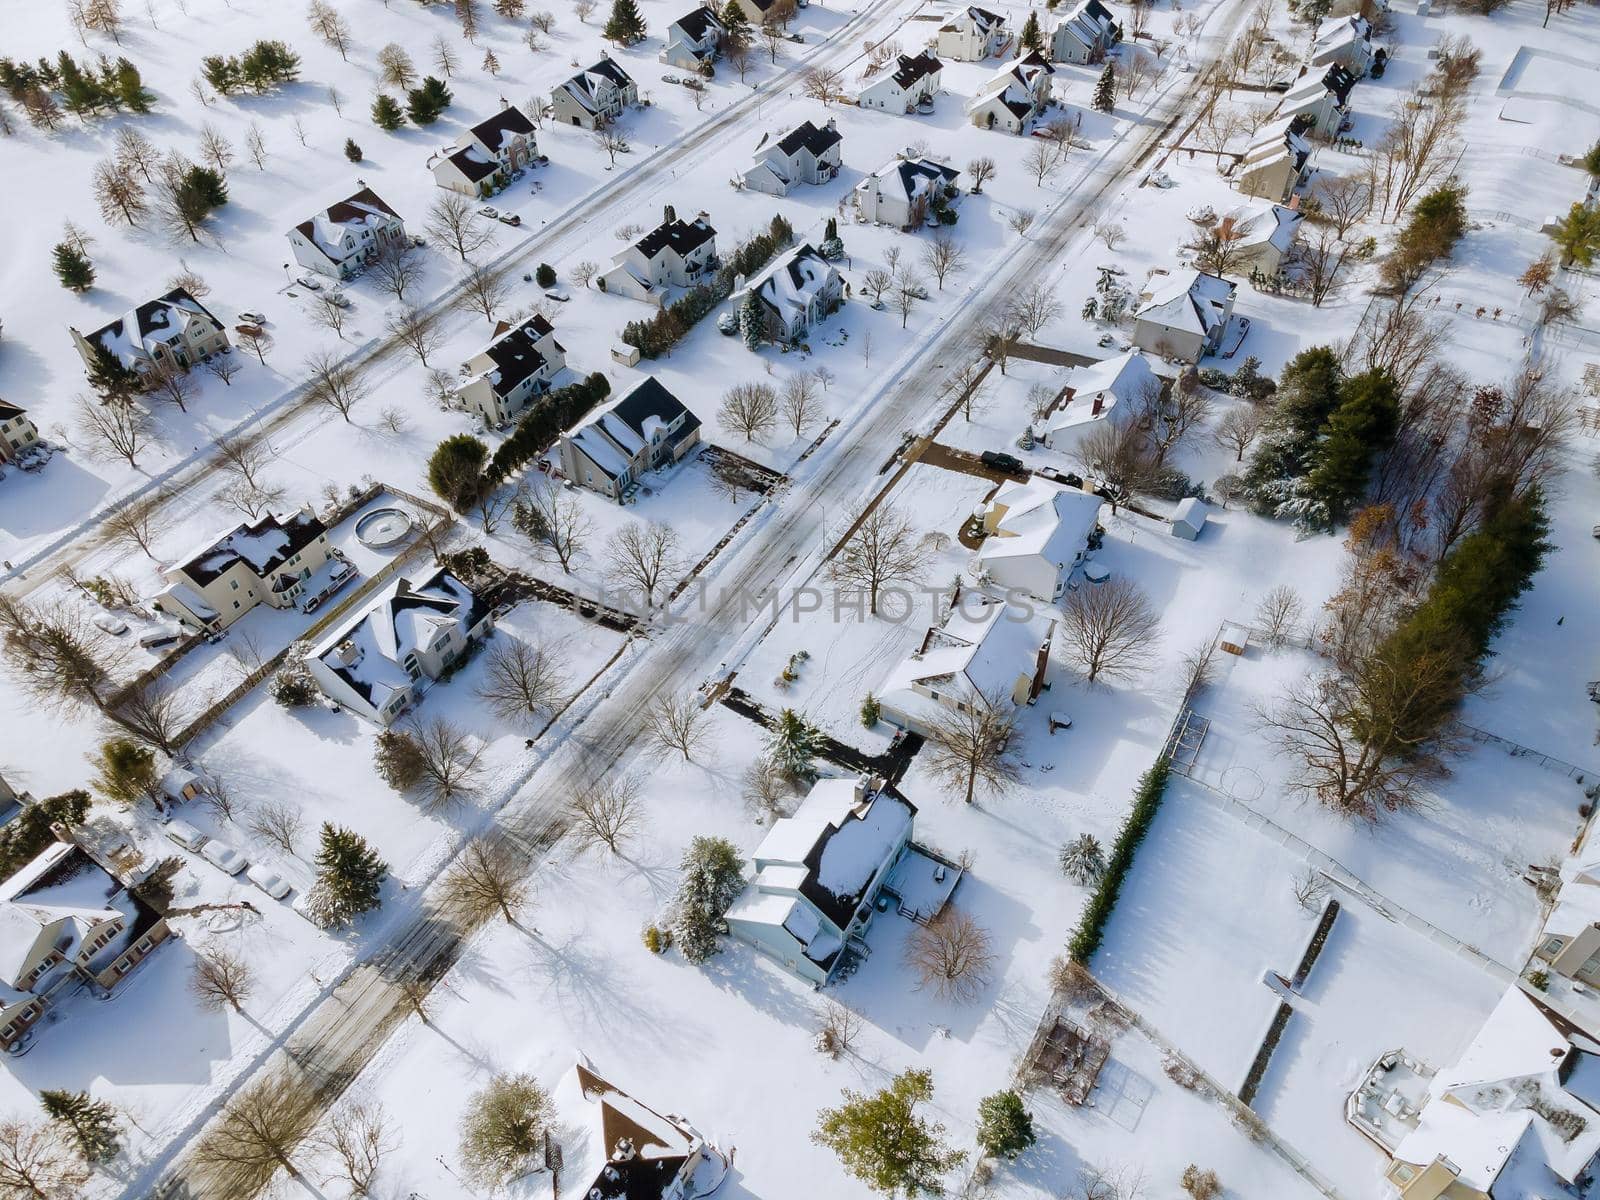 American town small home complex of a snowy winter on the residential streets after snowfall by ungvar